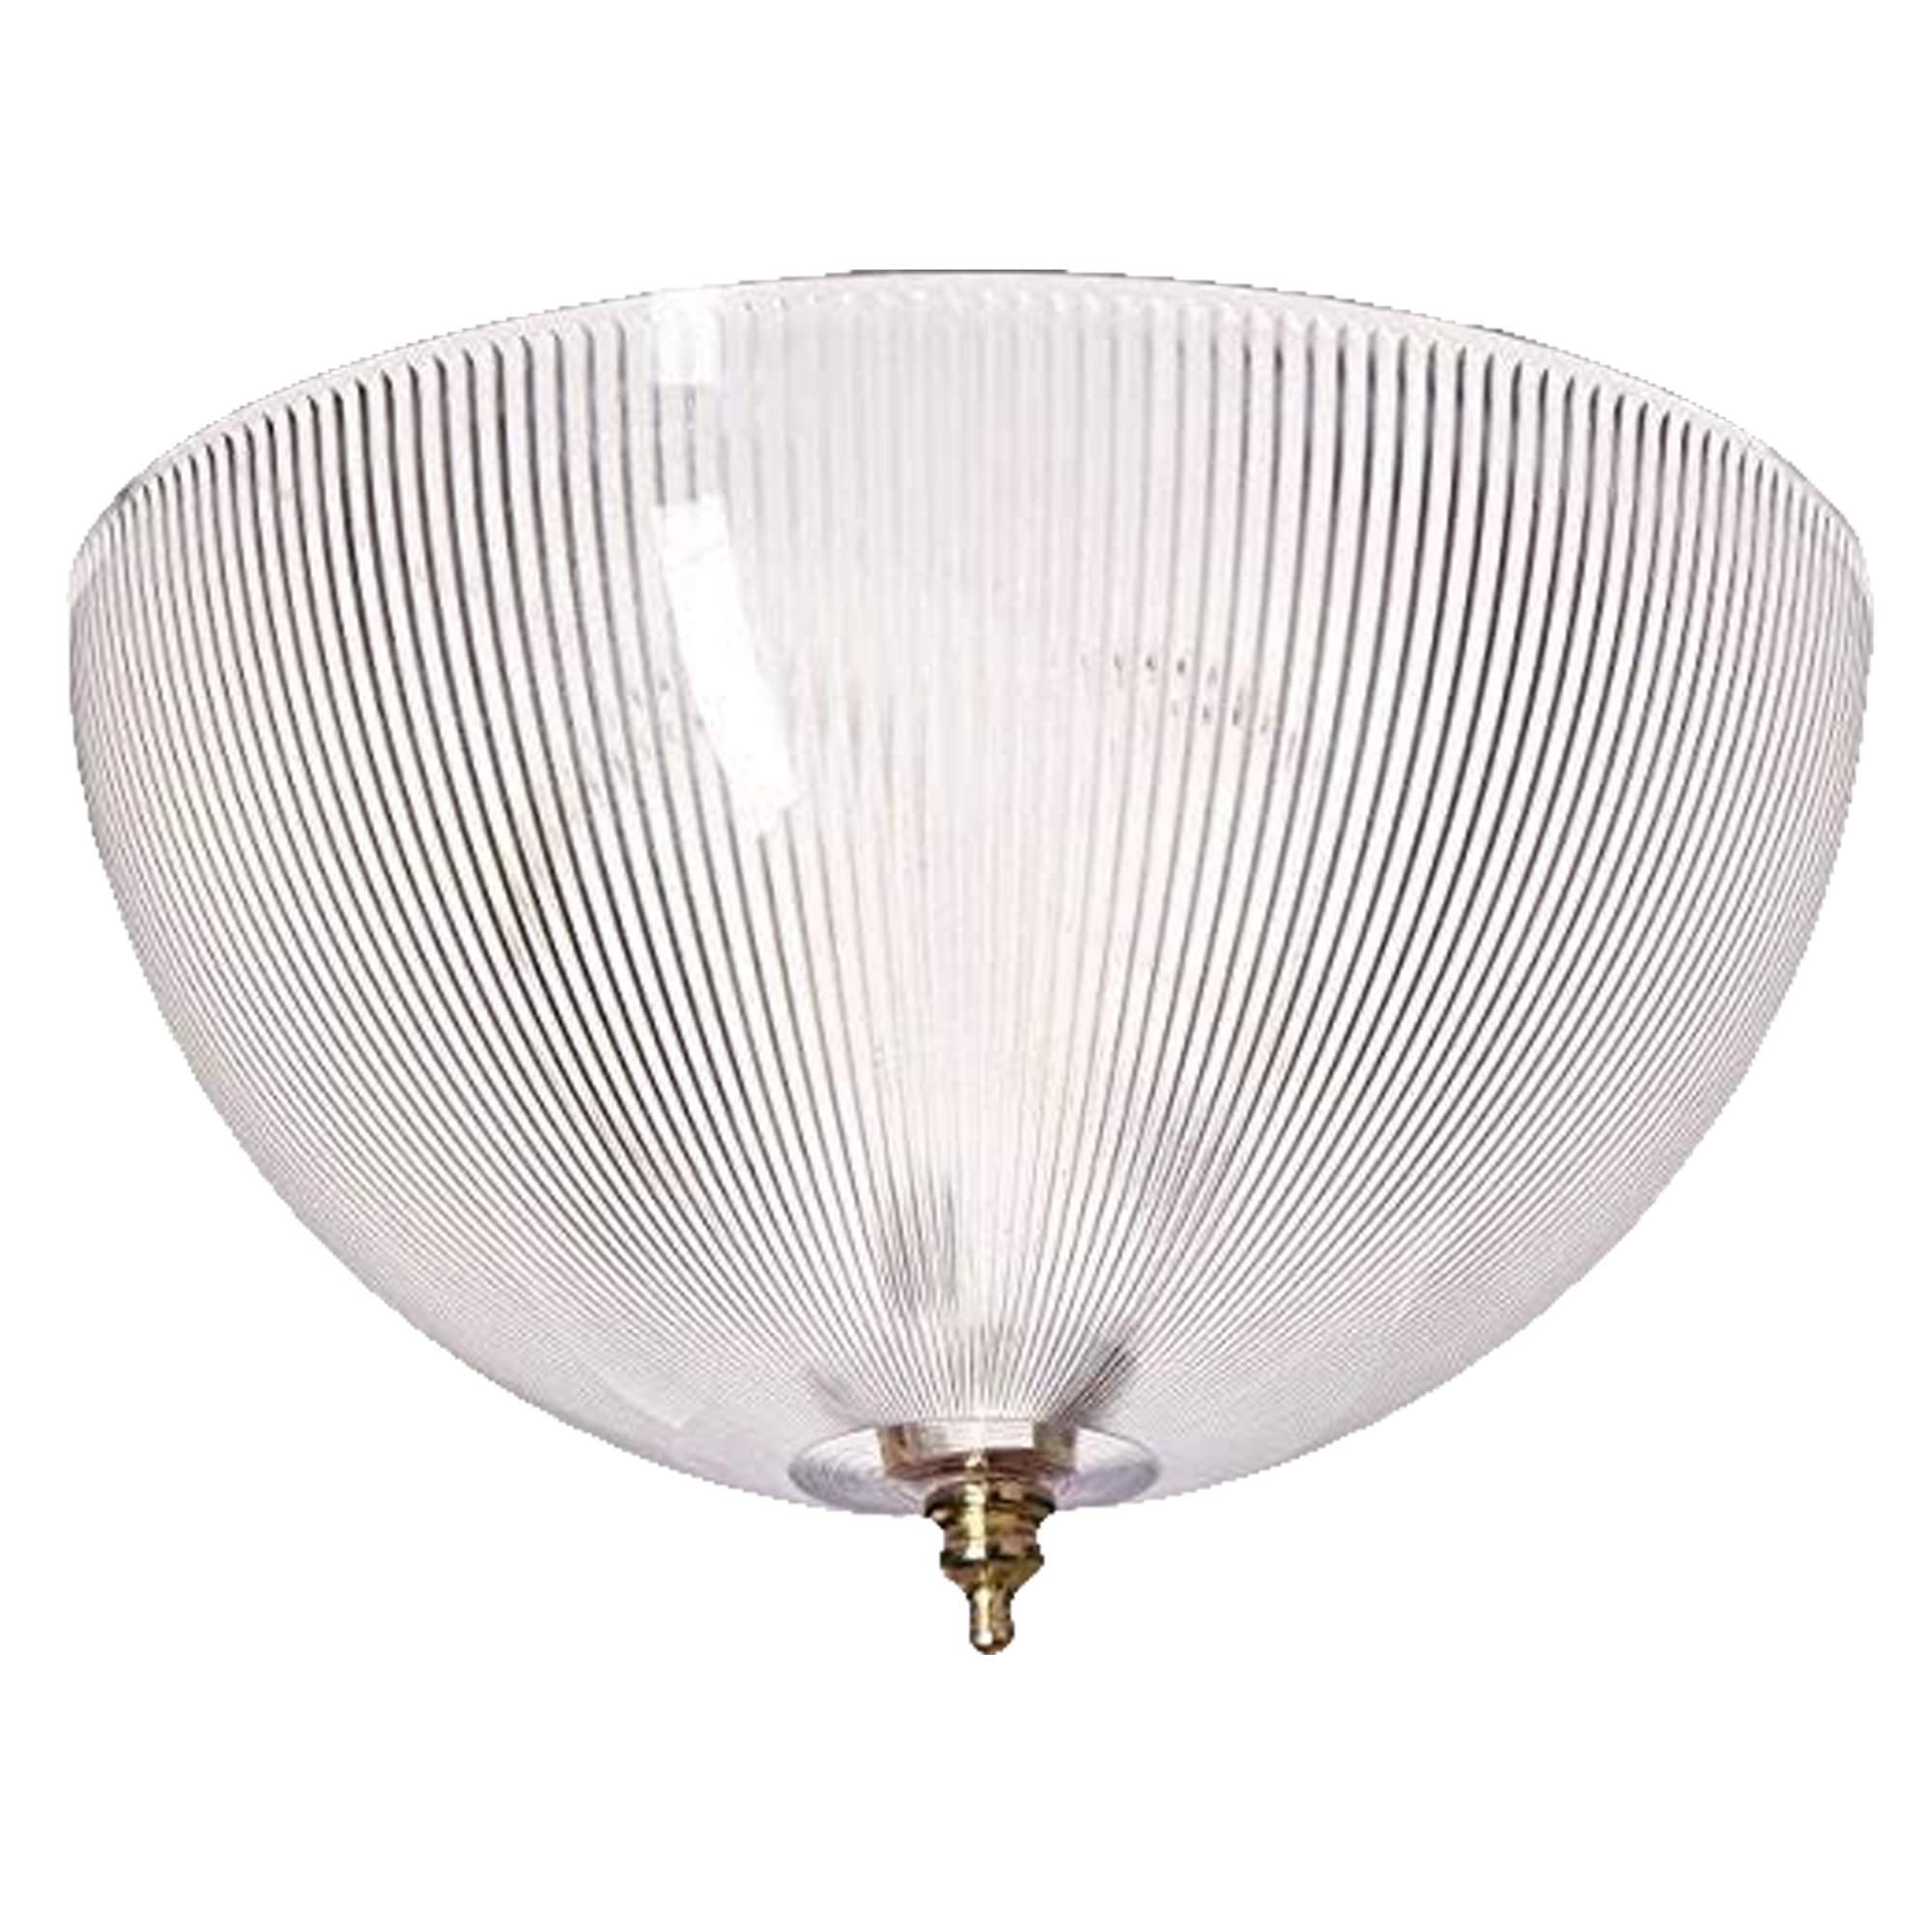 Ciata Lighting 4-3/4 Inch Ceiling Light Cover Fixture Dome Clip-On Shade For A-Shape Bulb  - Acceptable